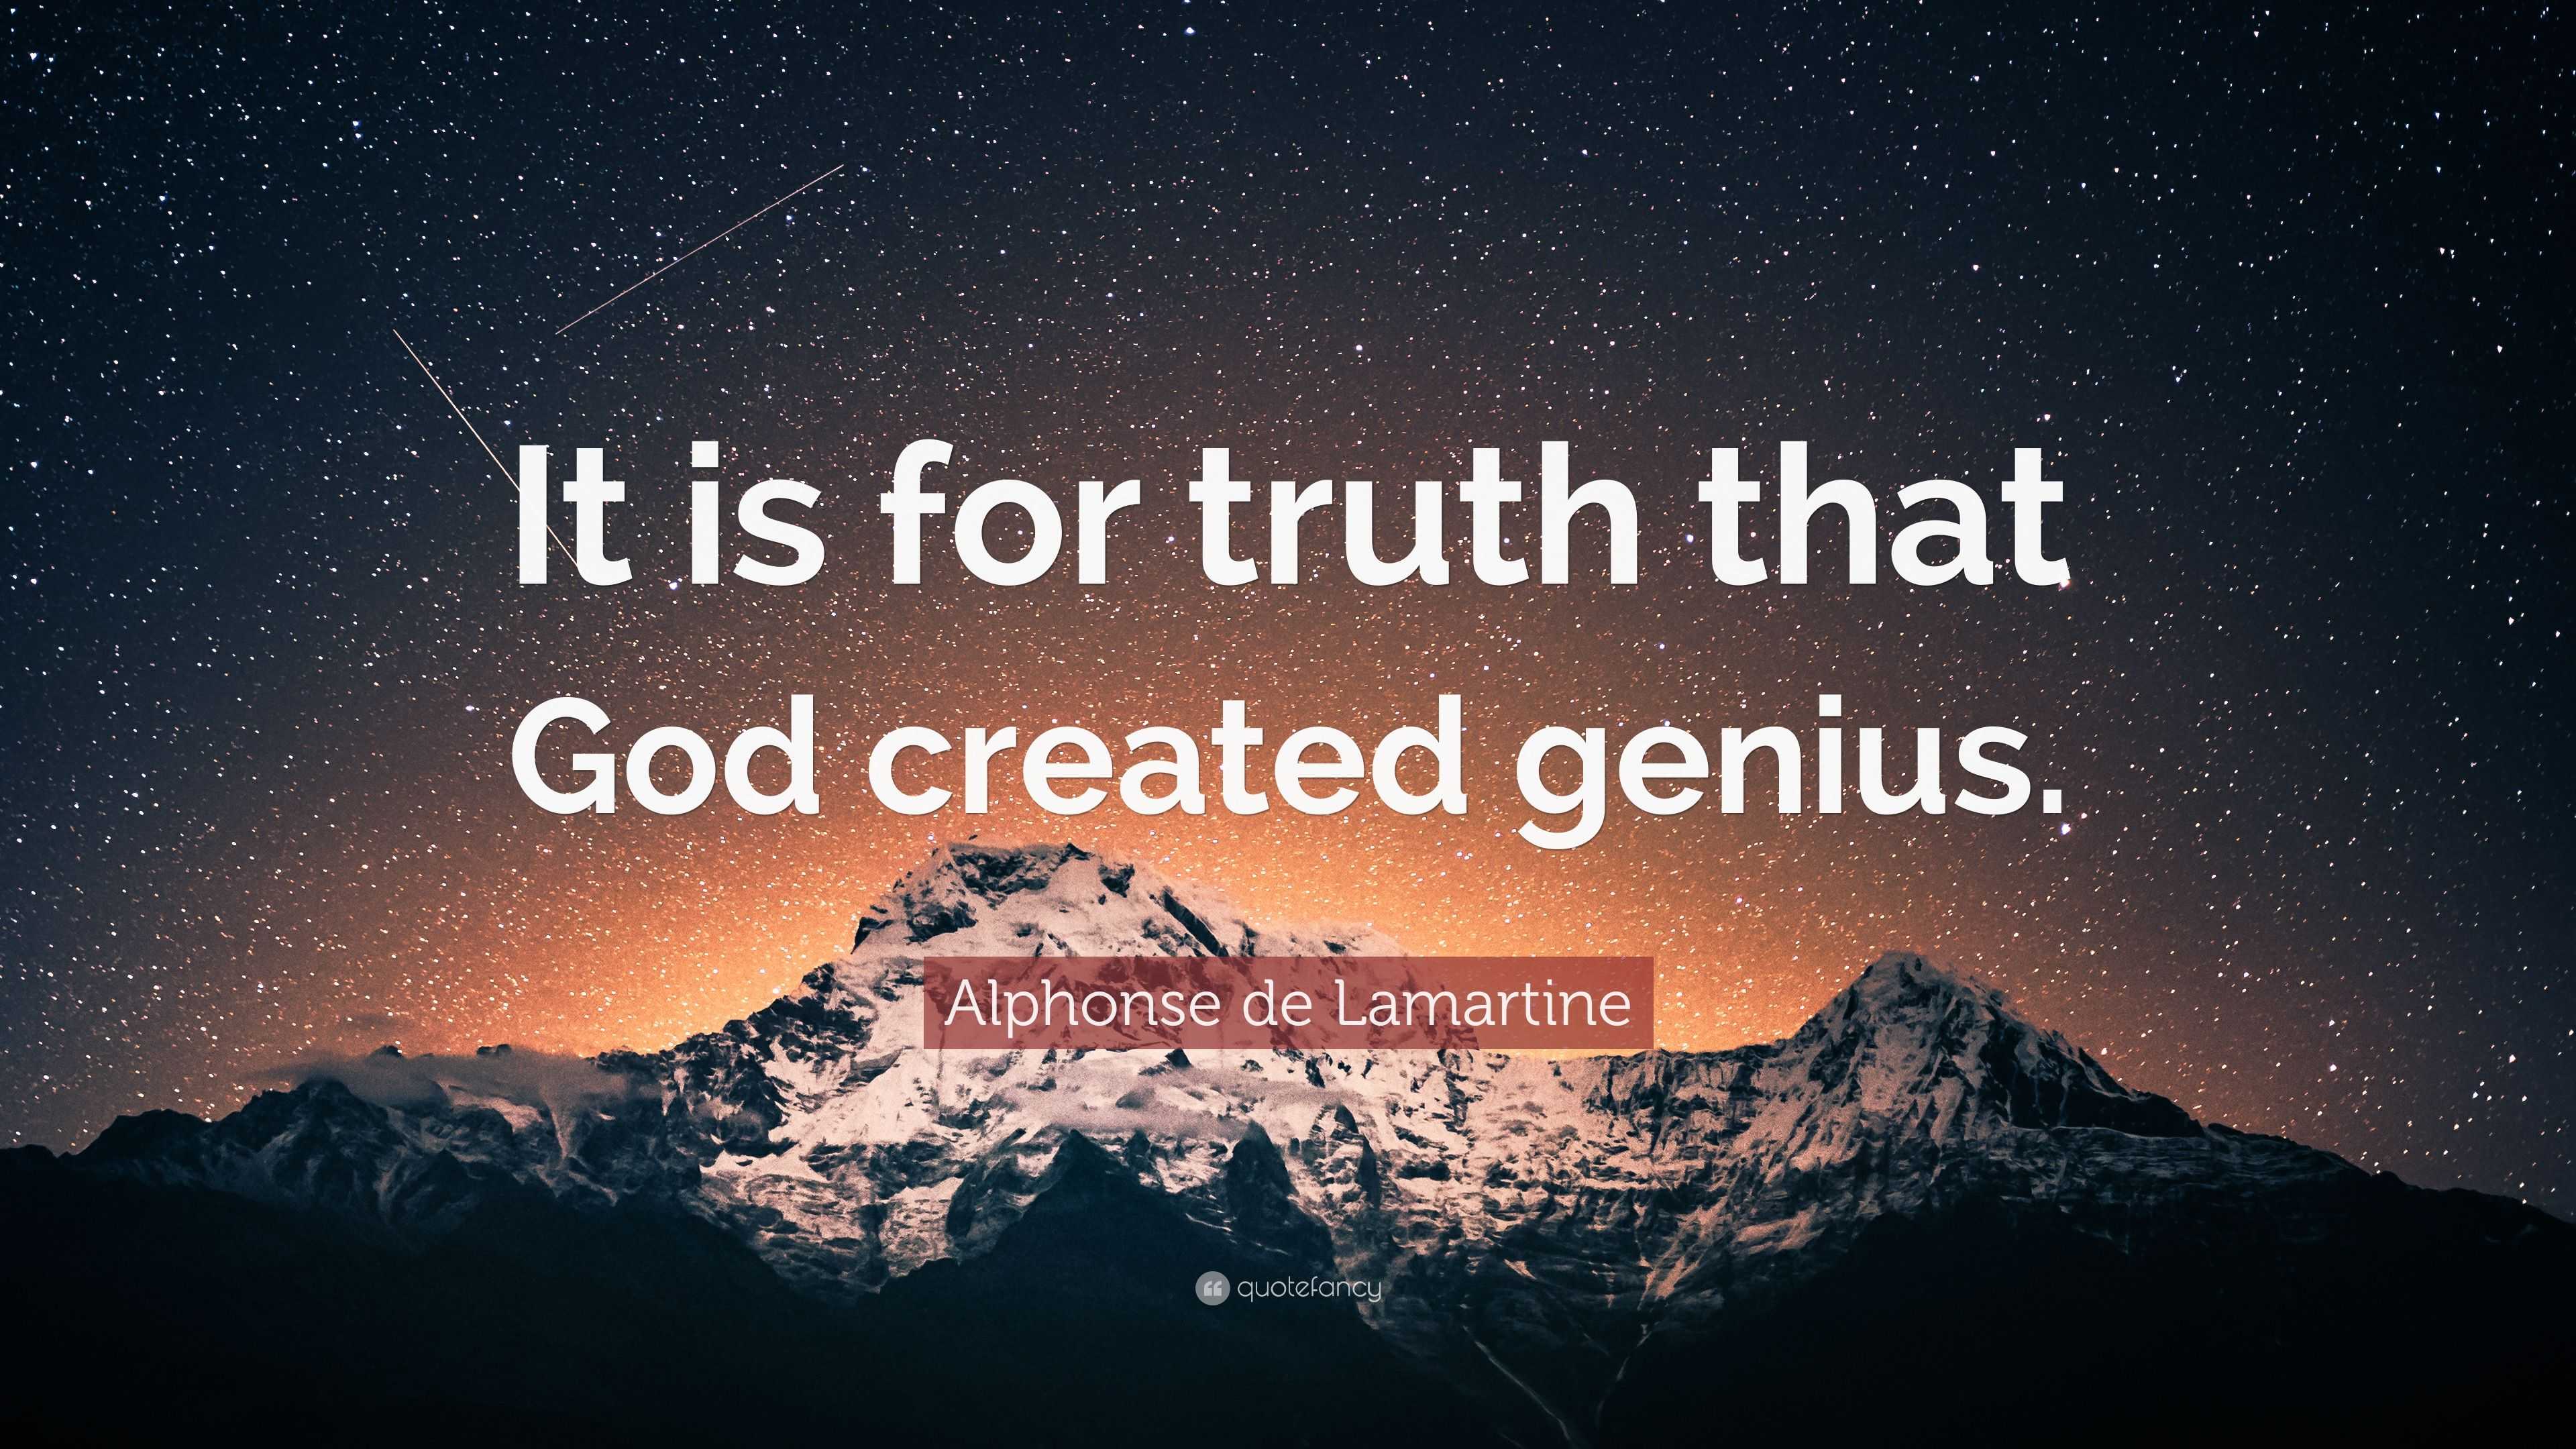 Alphonse de Lamartine Quote: “It is for truth that God created genius.”